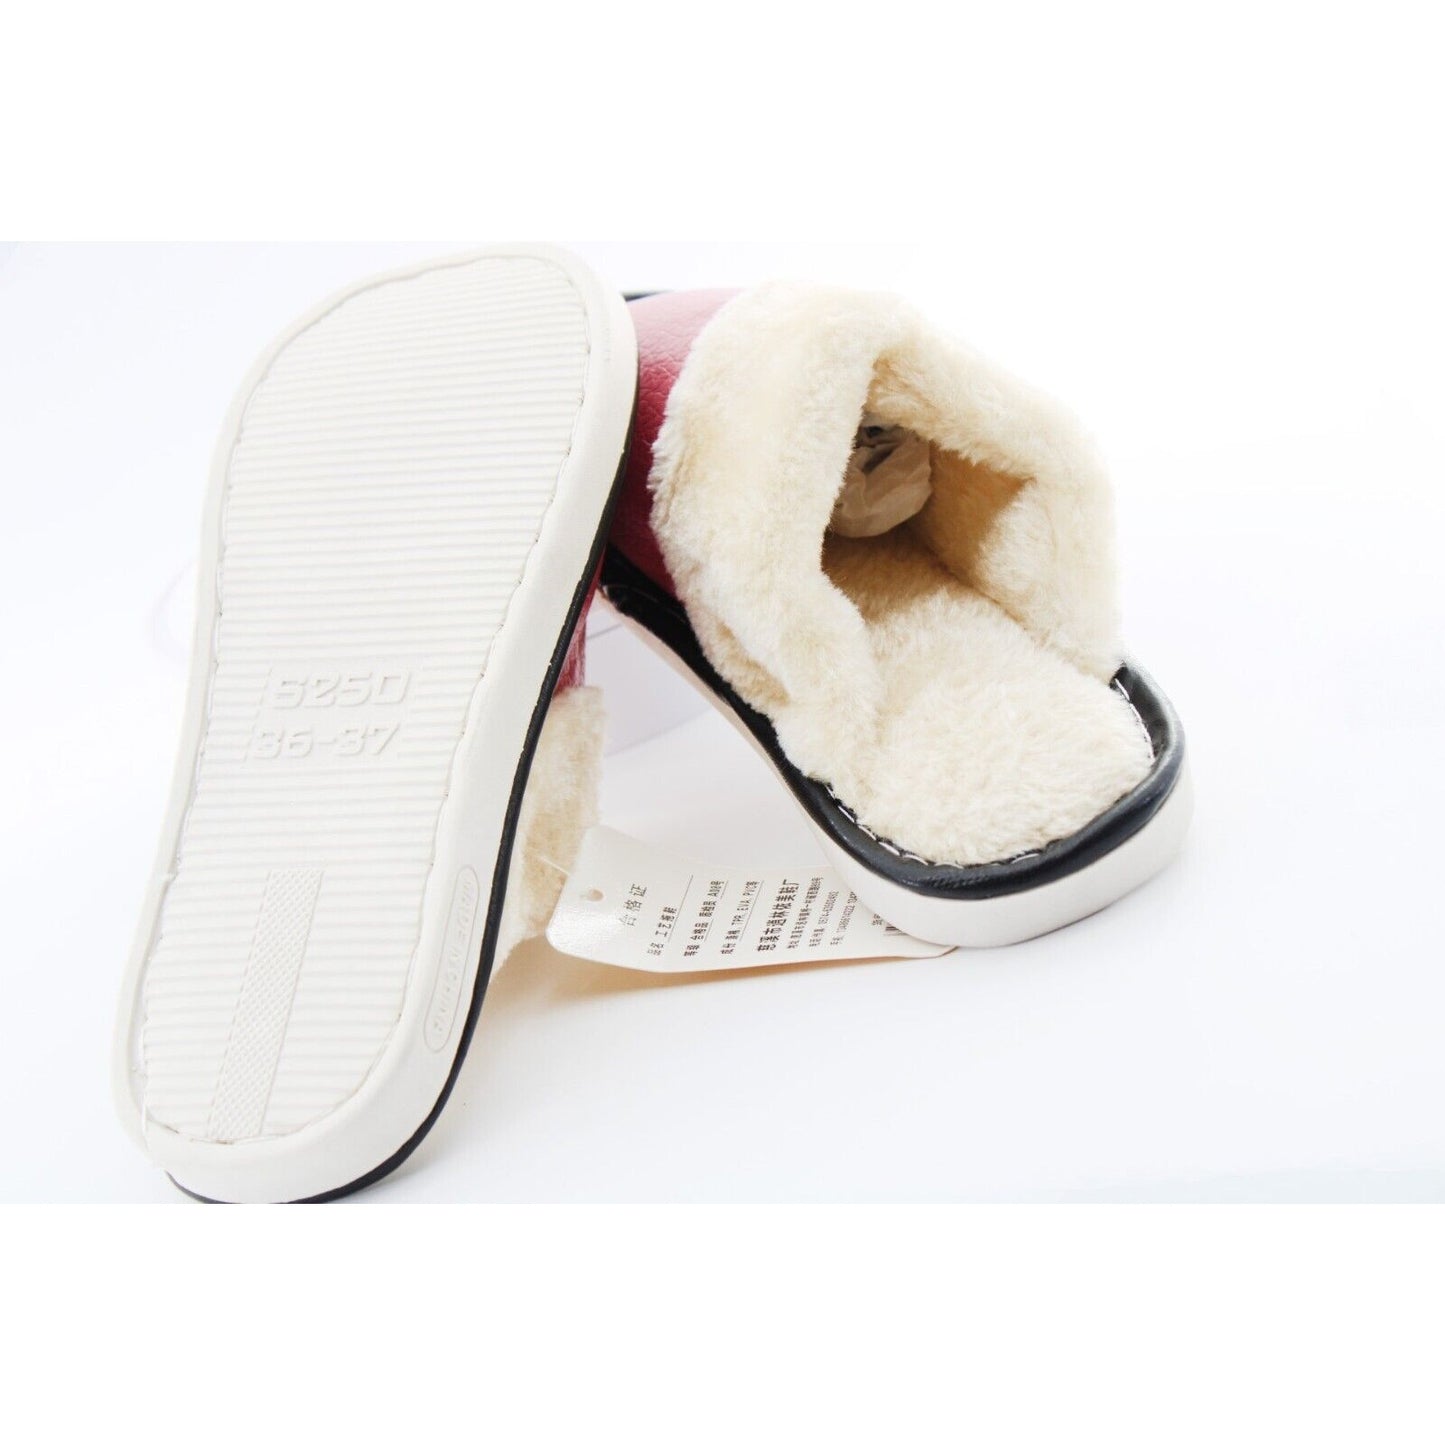 Yimeituo Women Faux Fur Lined Slippers Size 6